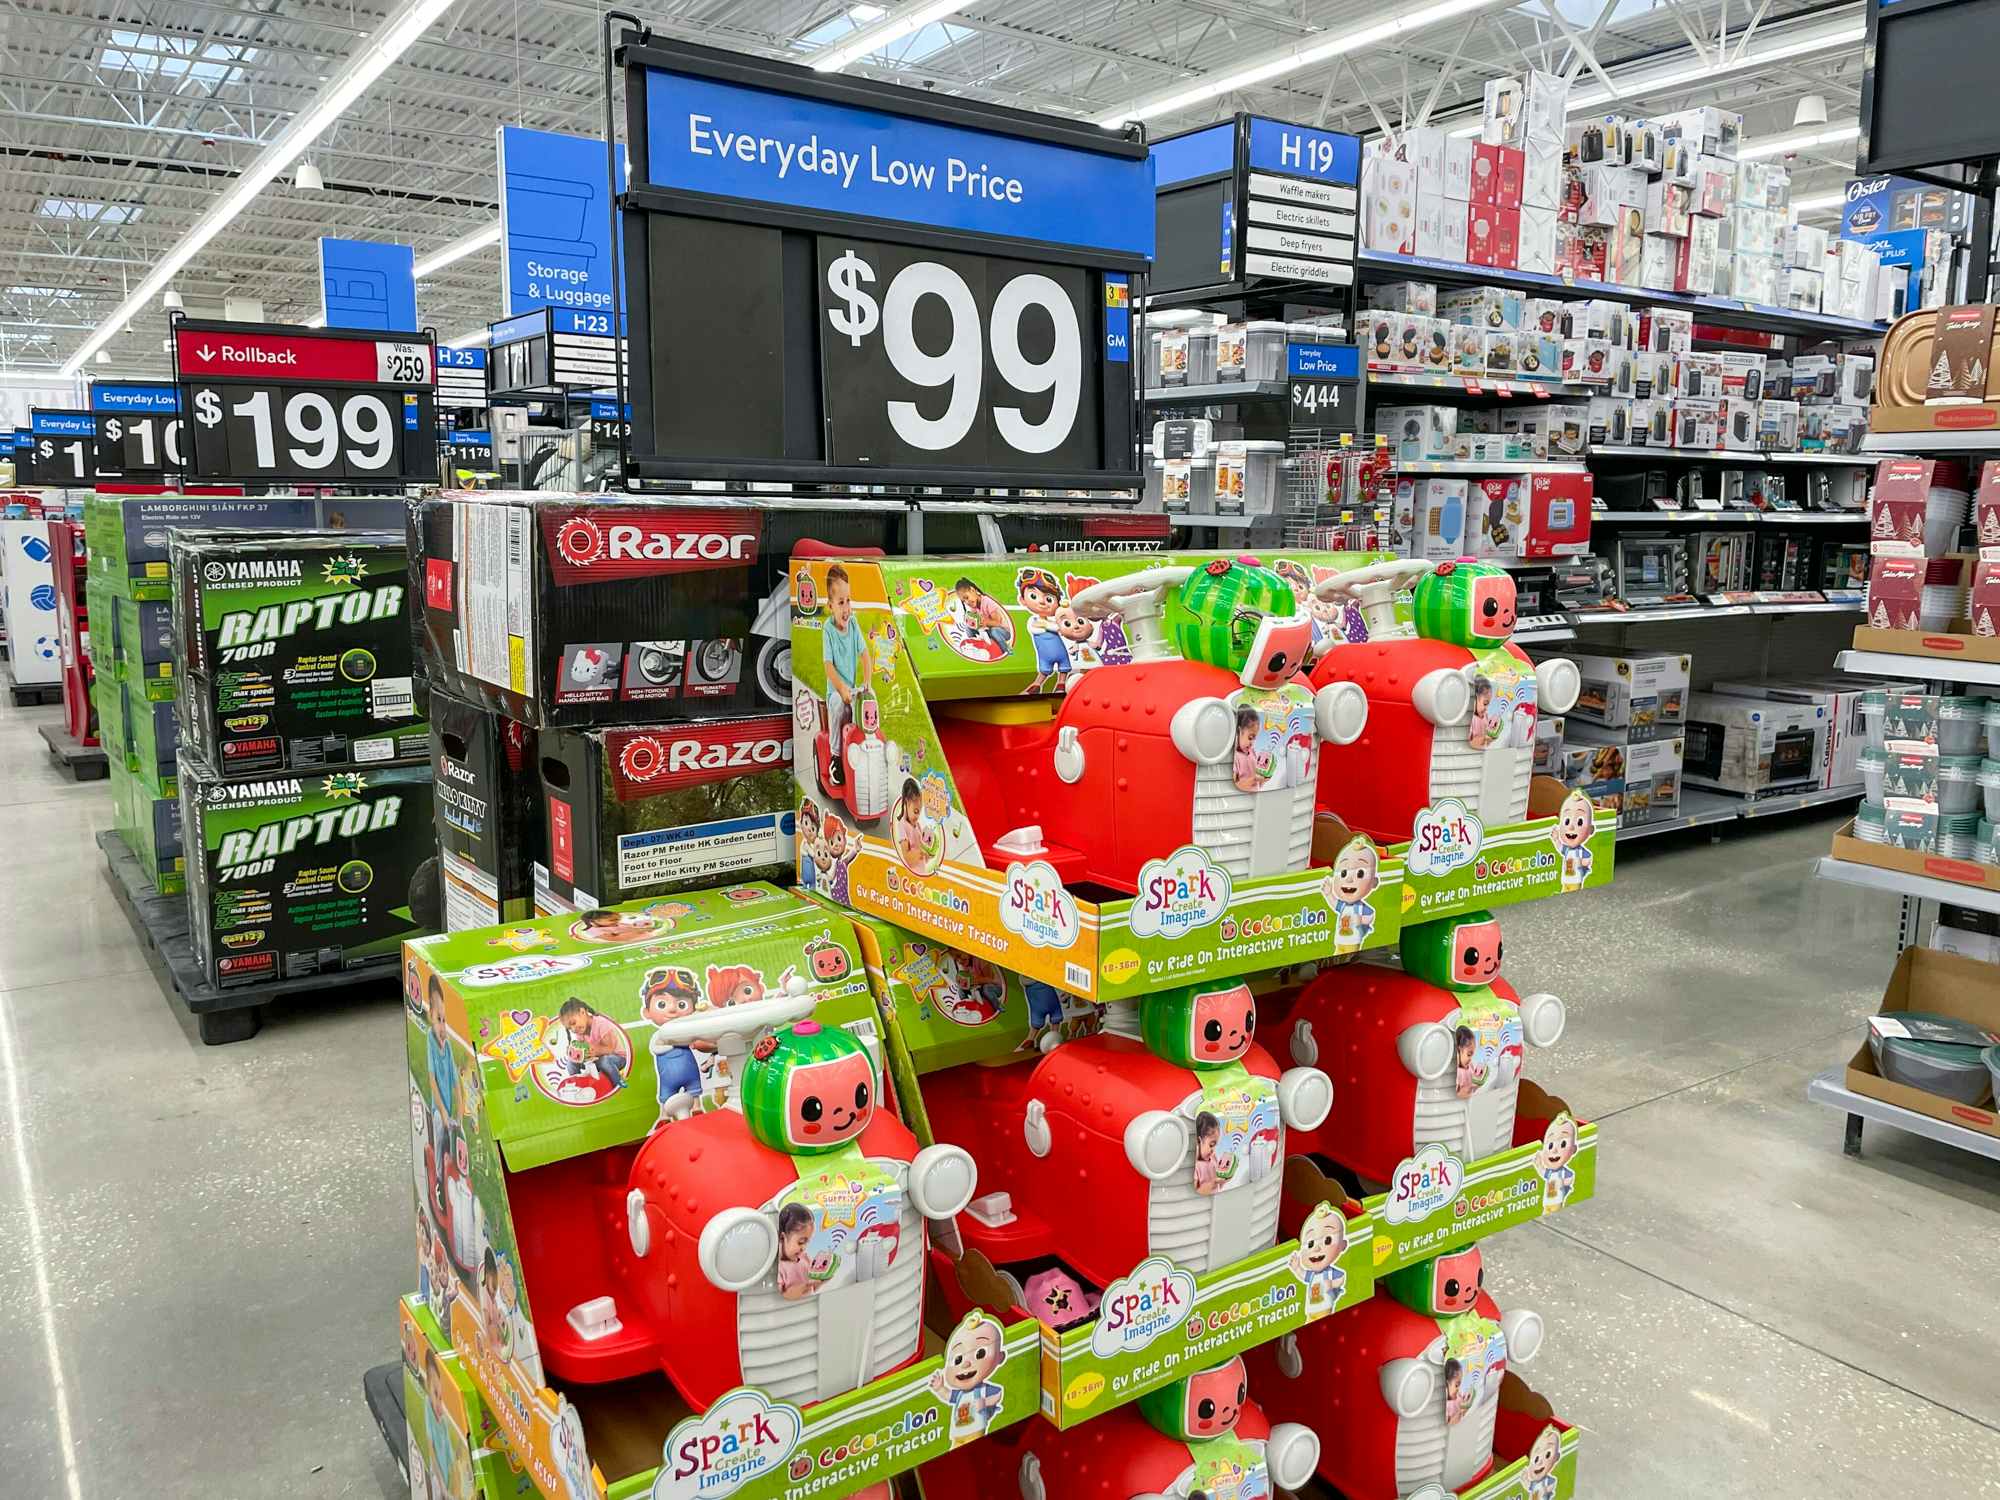 a display of ride-on toys for $99 at Walmart